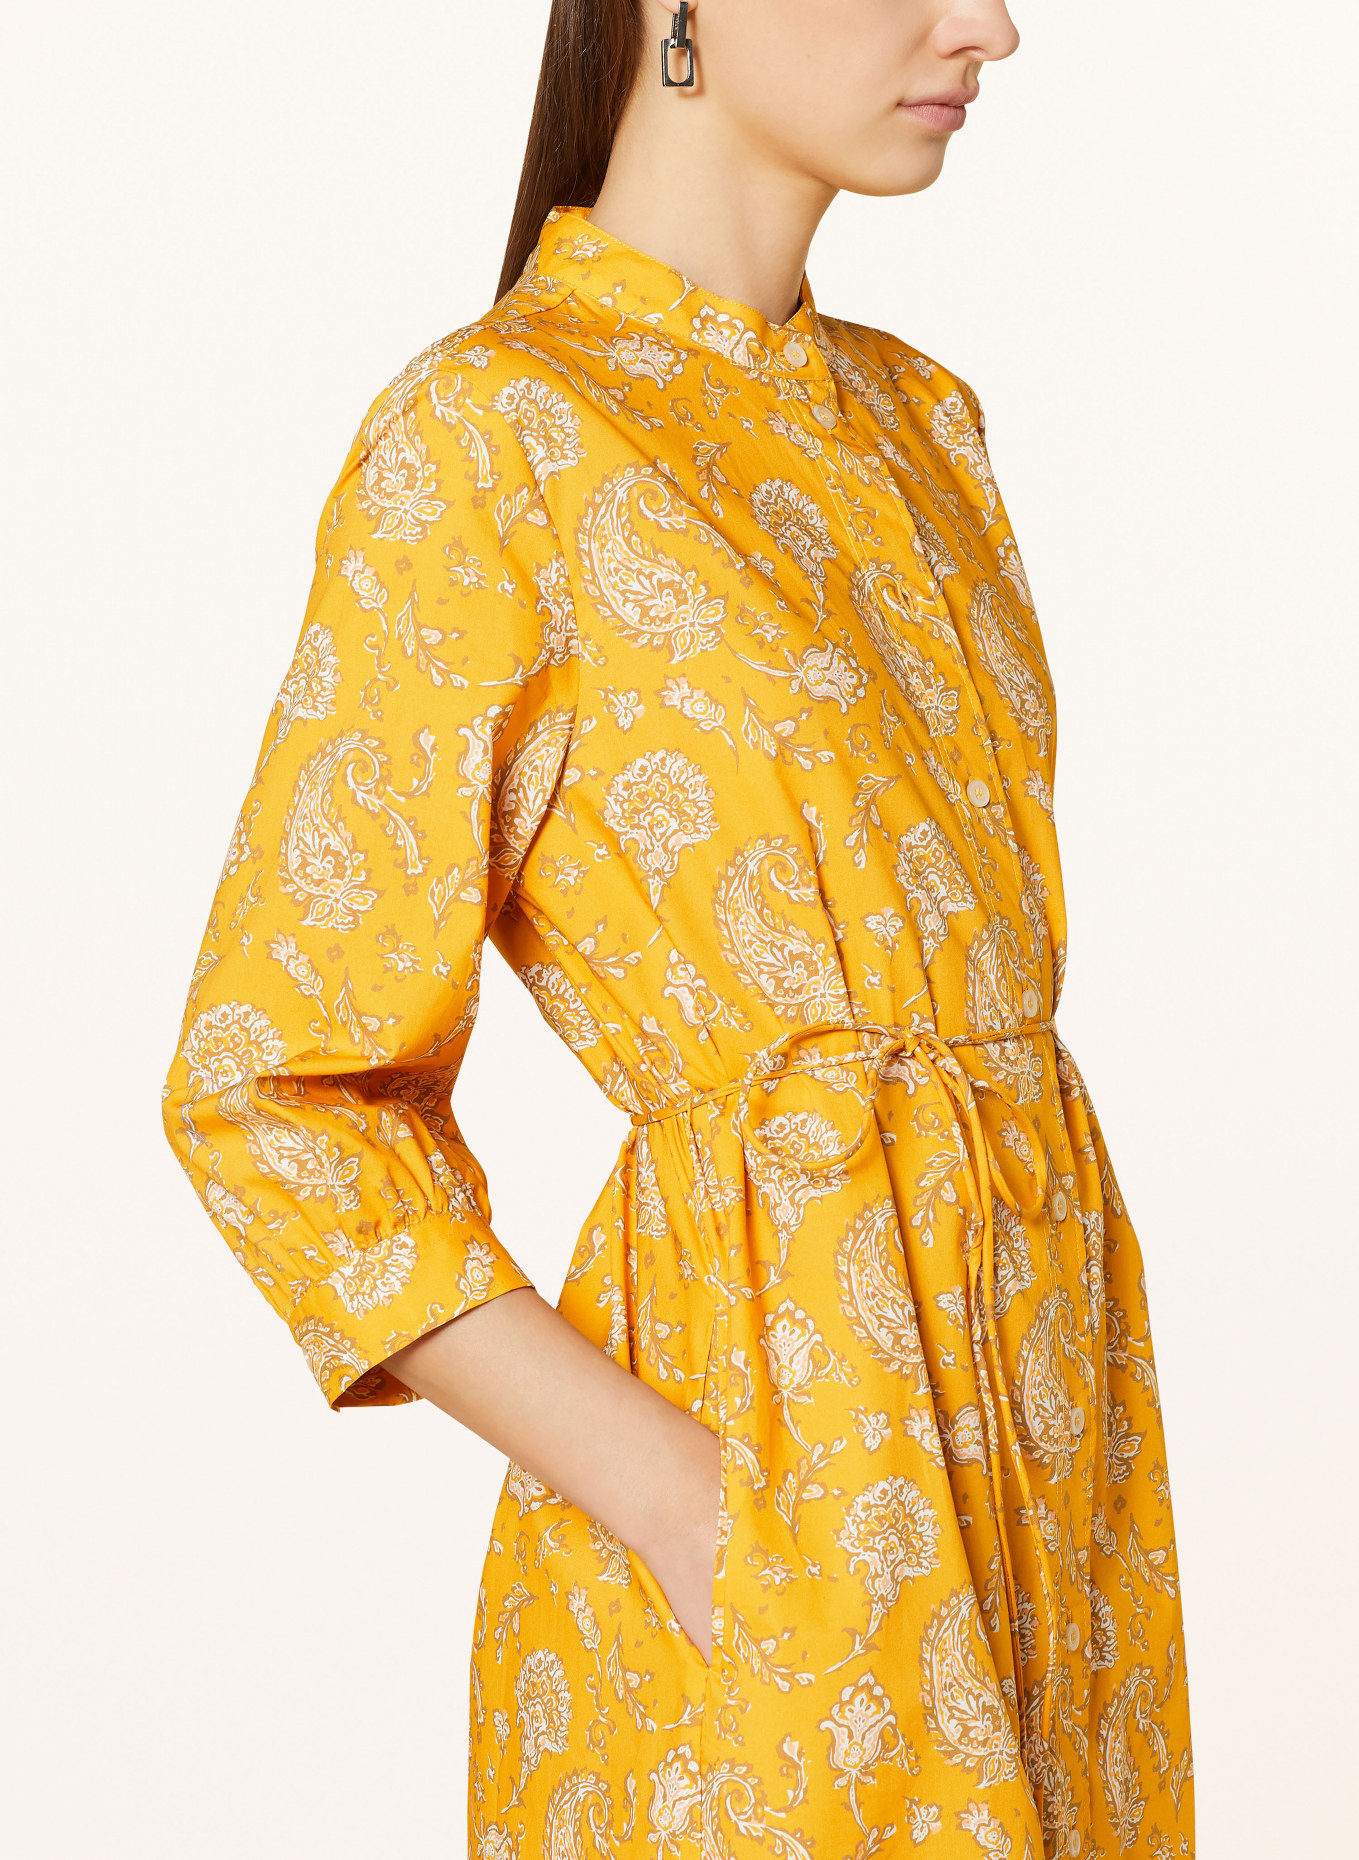 MAERZ MUENCHEN Shirt dress with 3/4 sleeves, Color: YELLOW/ WHITE/ BROWN (Image 4)